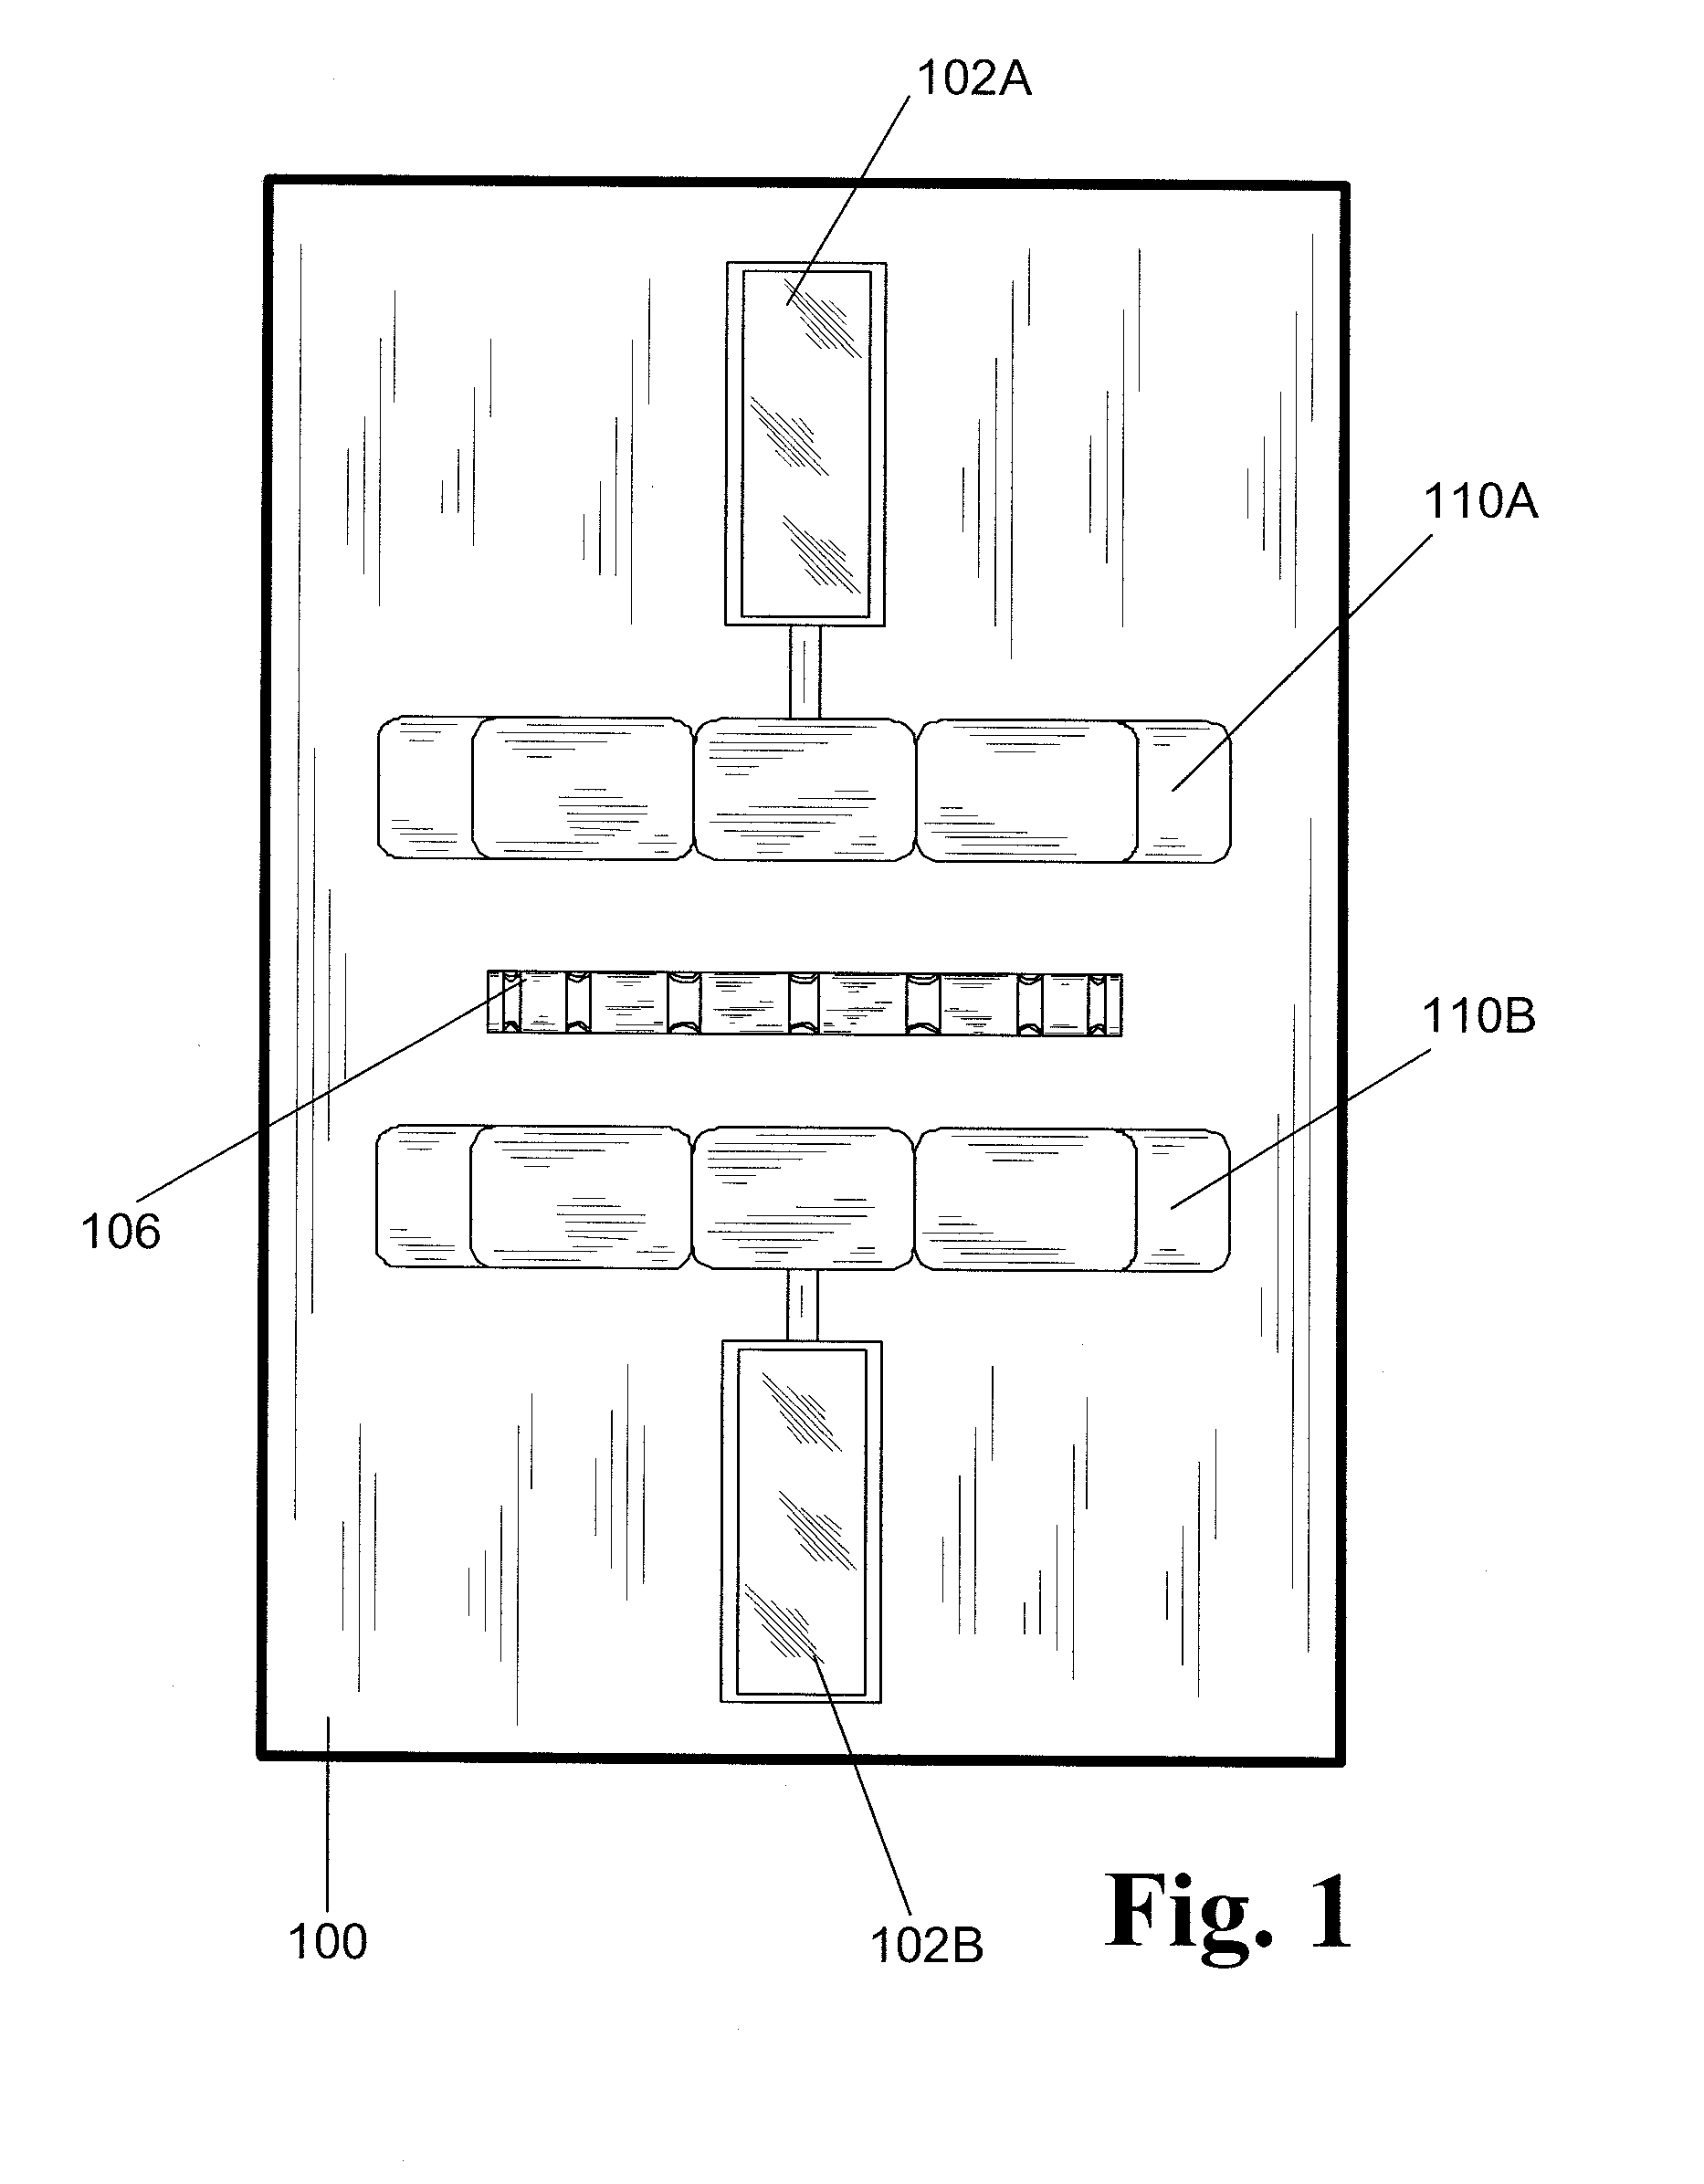 Method of configuring a production line to mass customize shaped vessels